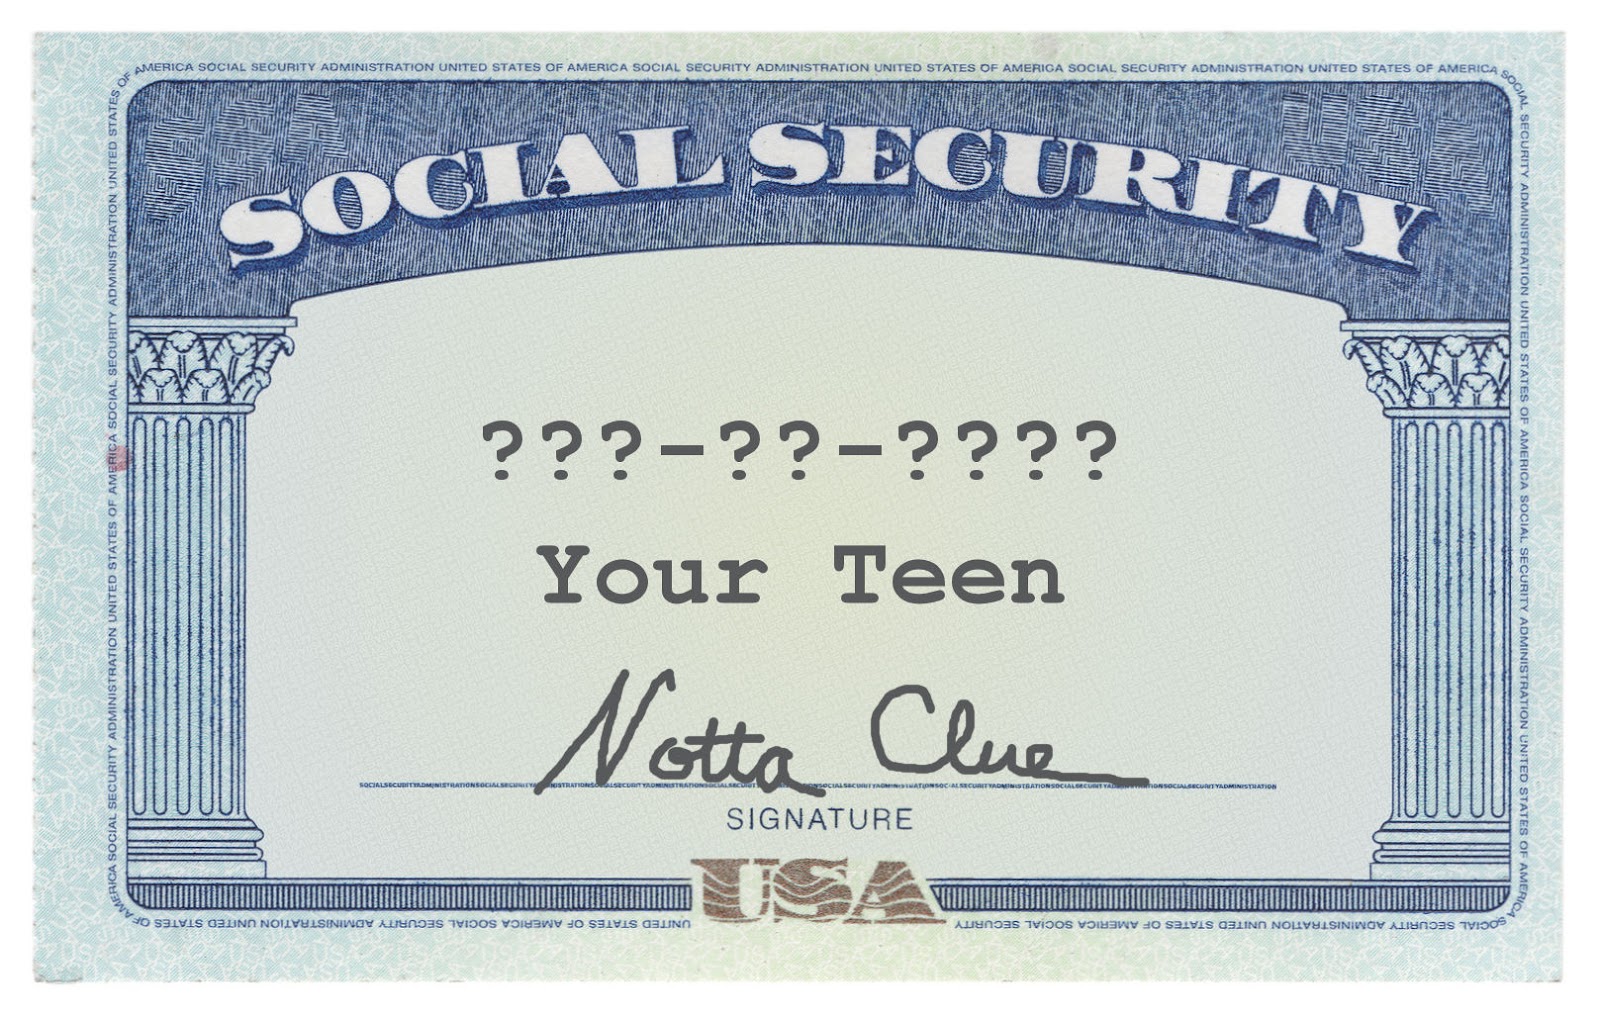 Family Finance Favs: Teach Kids To Memorize Their Social Security Numbers